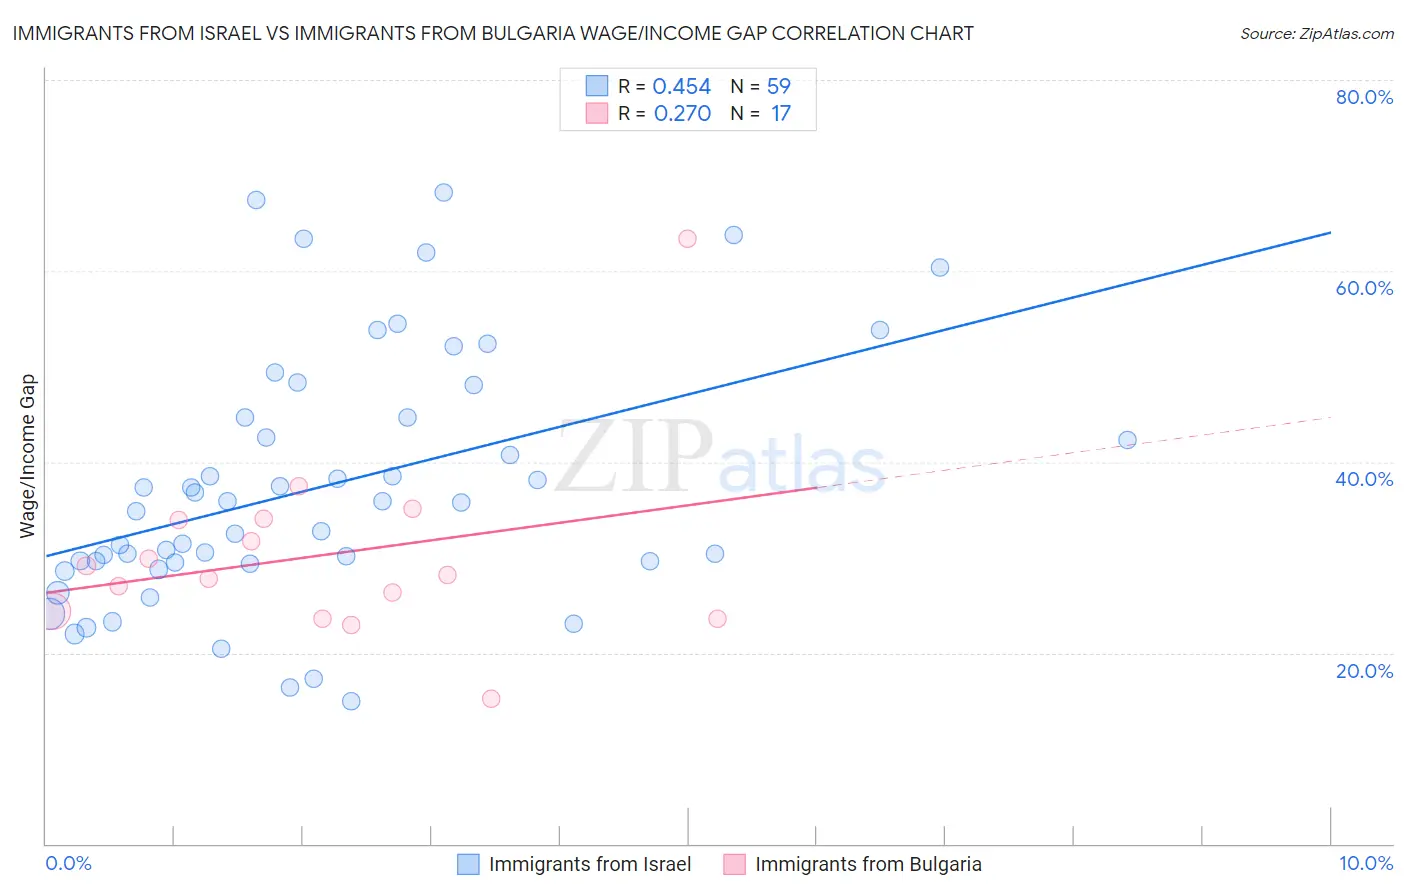 Immigrants from Israel vs Immigrants from Bulgaria Wage/Income Gap